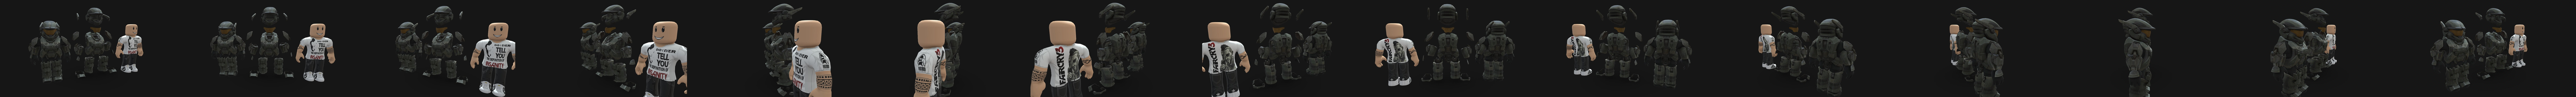 Roblox Halo Suit Download Free 3d Model By Nermin Nermin 70331bb - roblox open suit